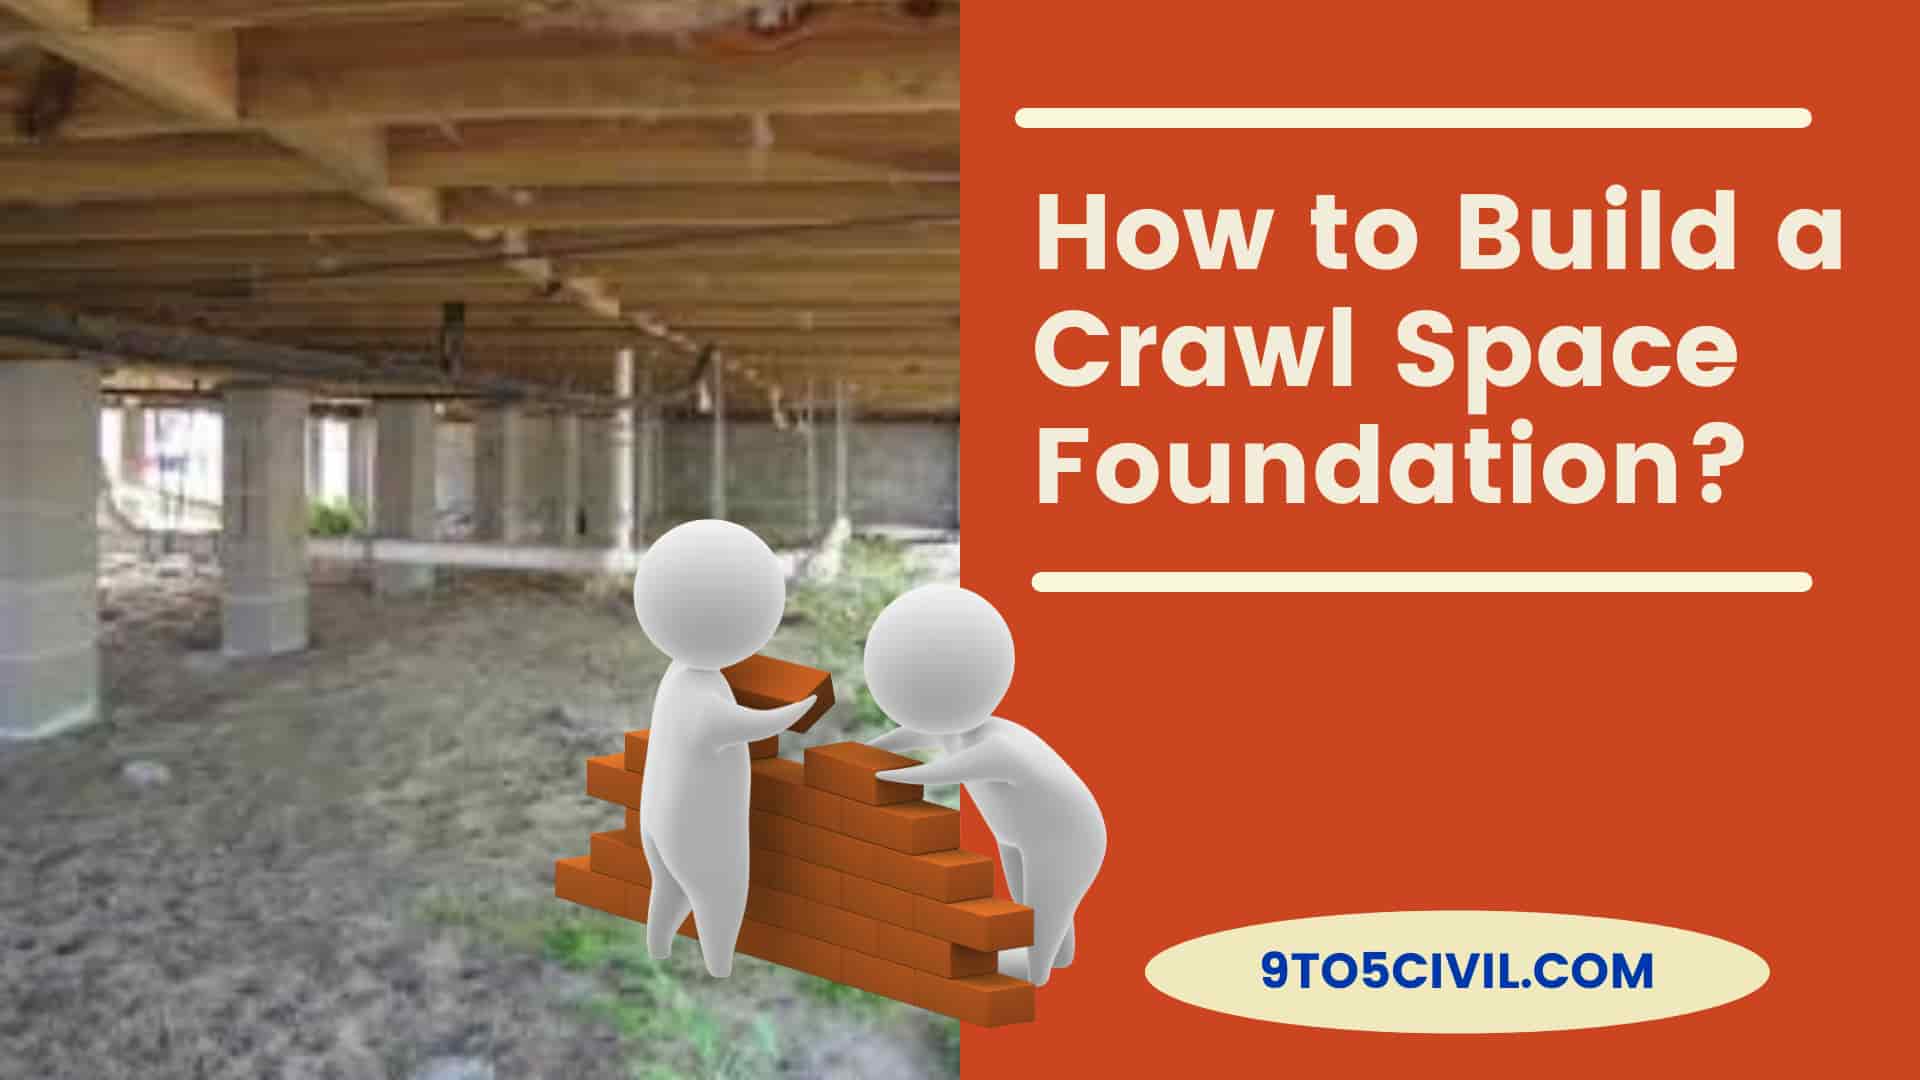 How to Build a Crawl Space Foundation